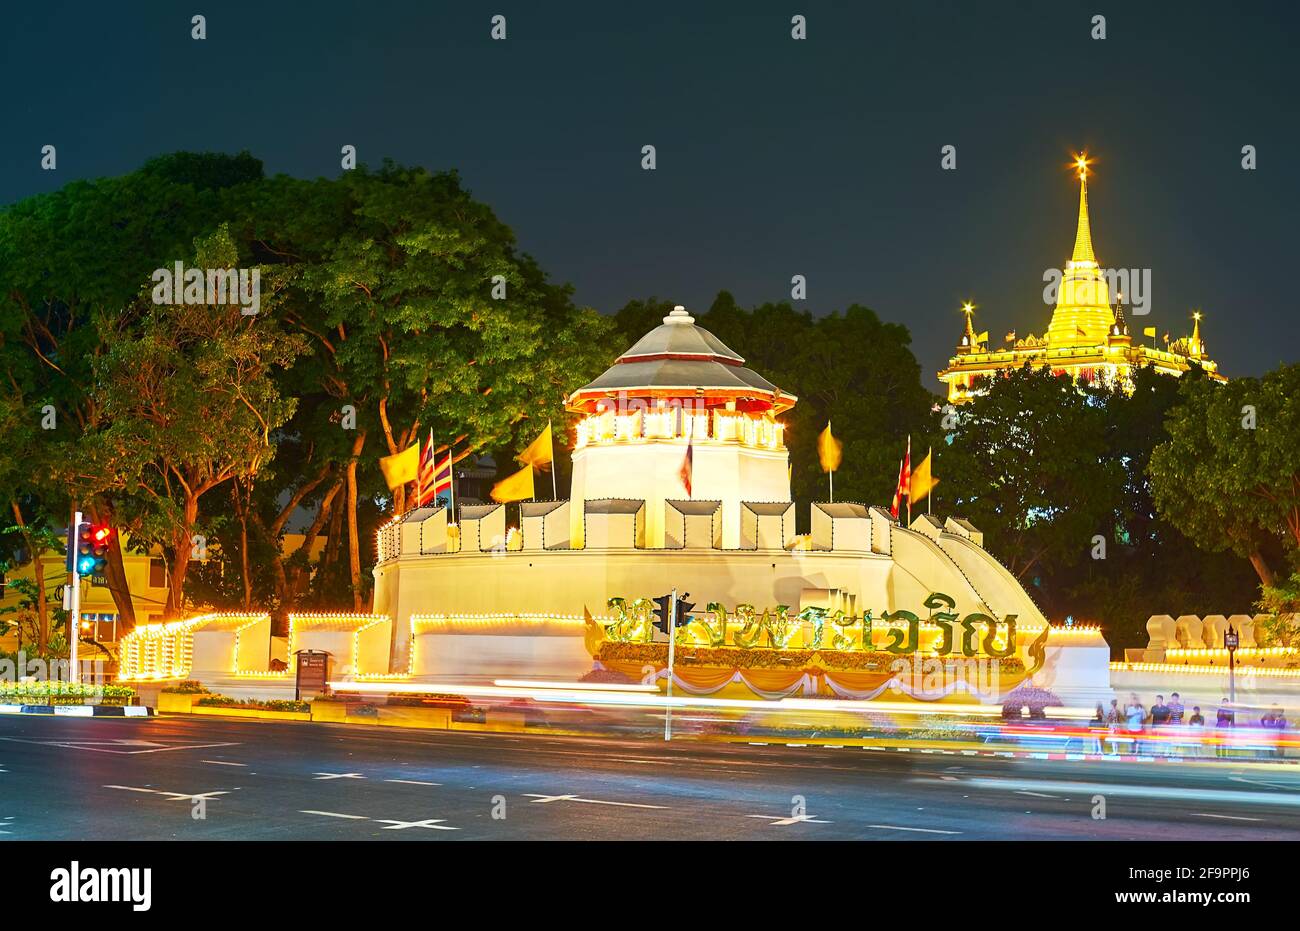 The medieval Phra Sumet Fort and the picturesque stupa of the Golden Mount Temple, seen behind the greenery of Santichaiprakarn Park, Bangkok, Thailan Stock Photo